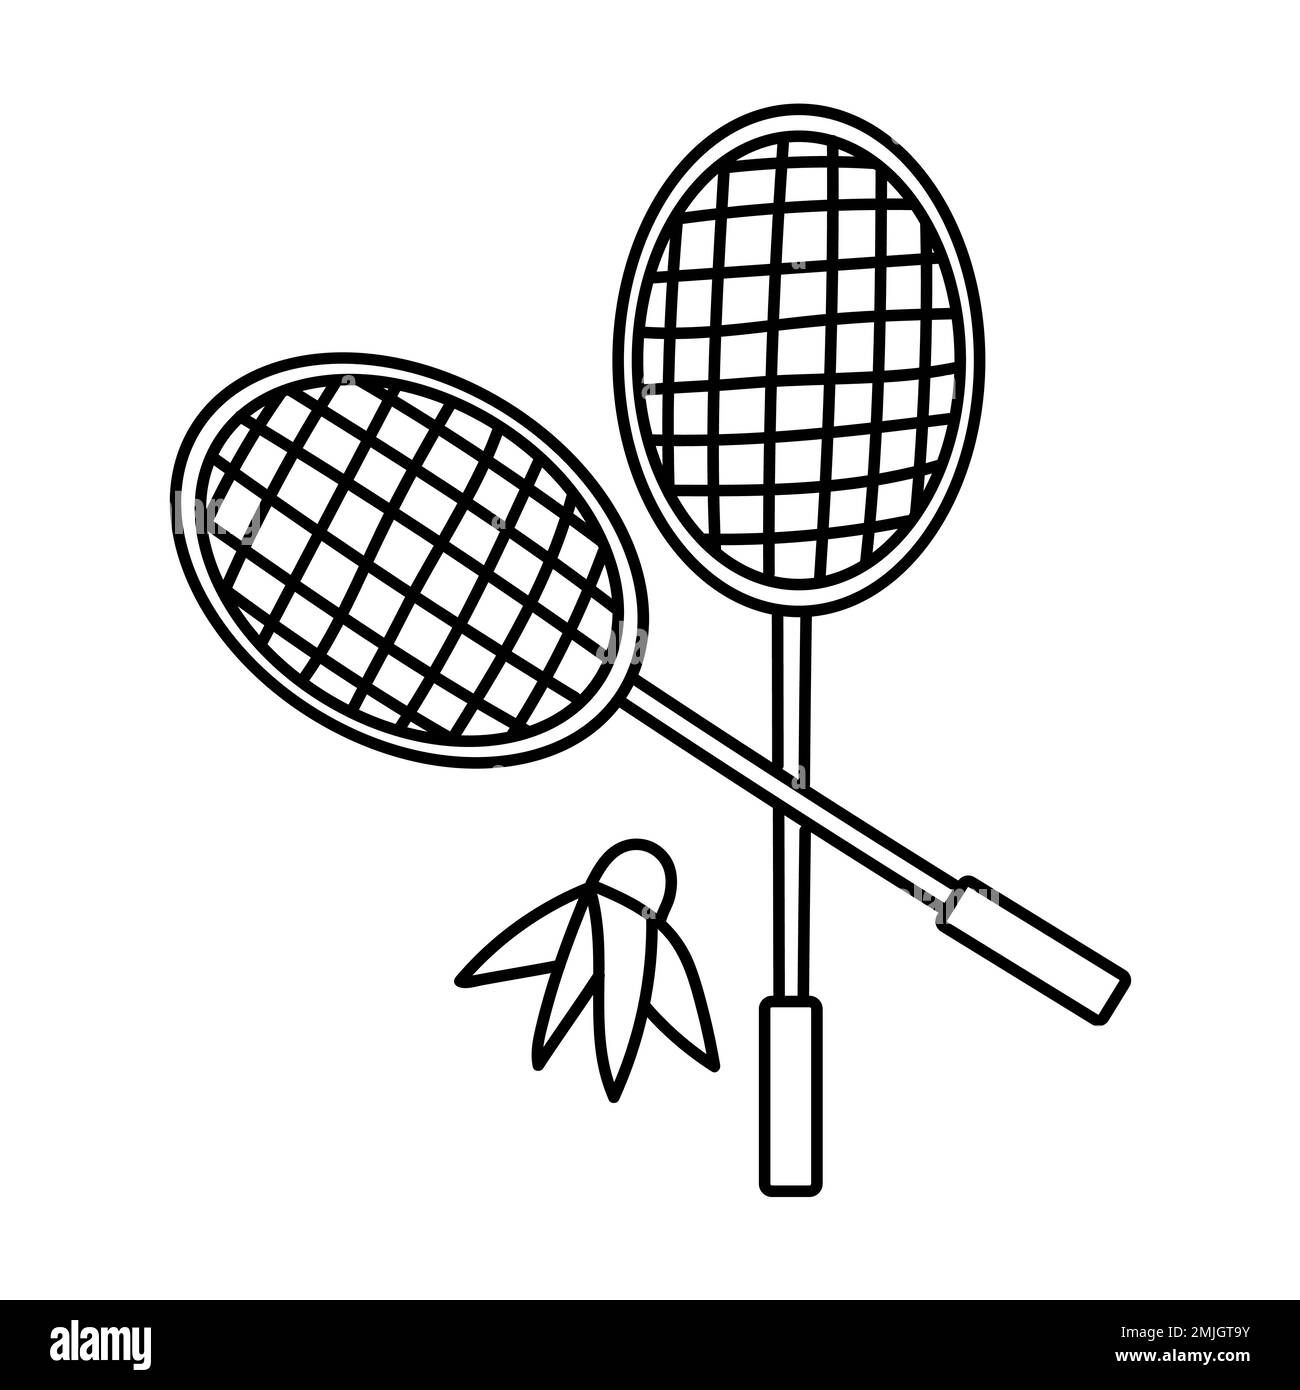 Sketch Boy Girl Playing Badminton On Stock Vector (Royalty Free) 55298884 |  Shutterstock